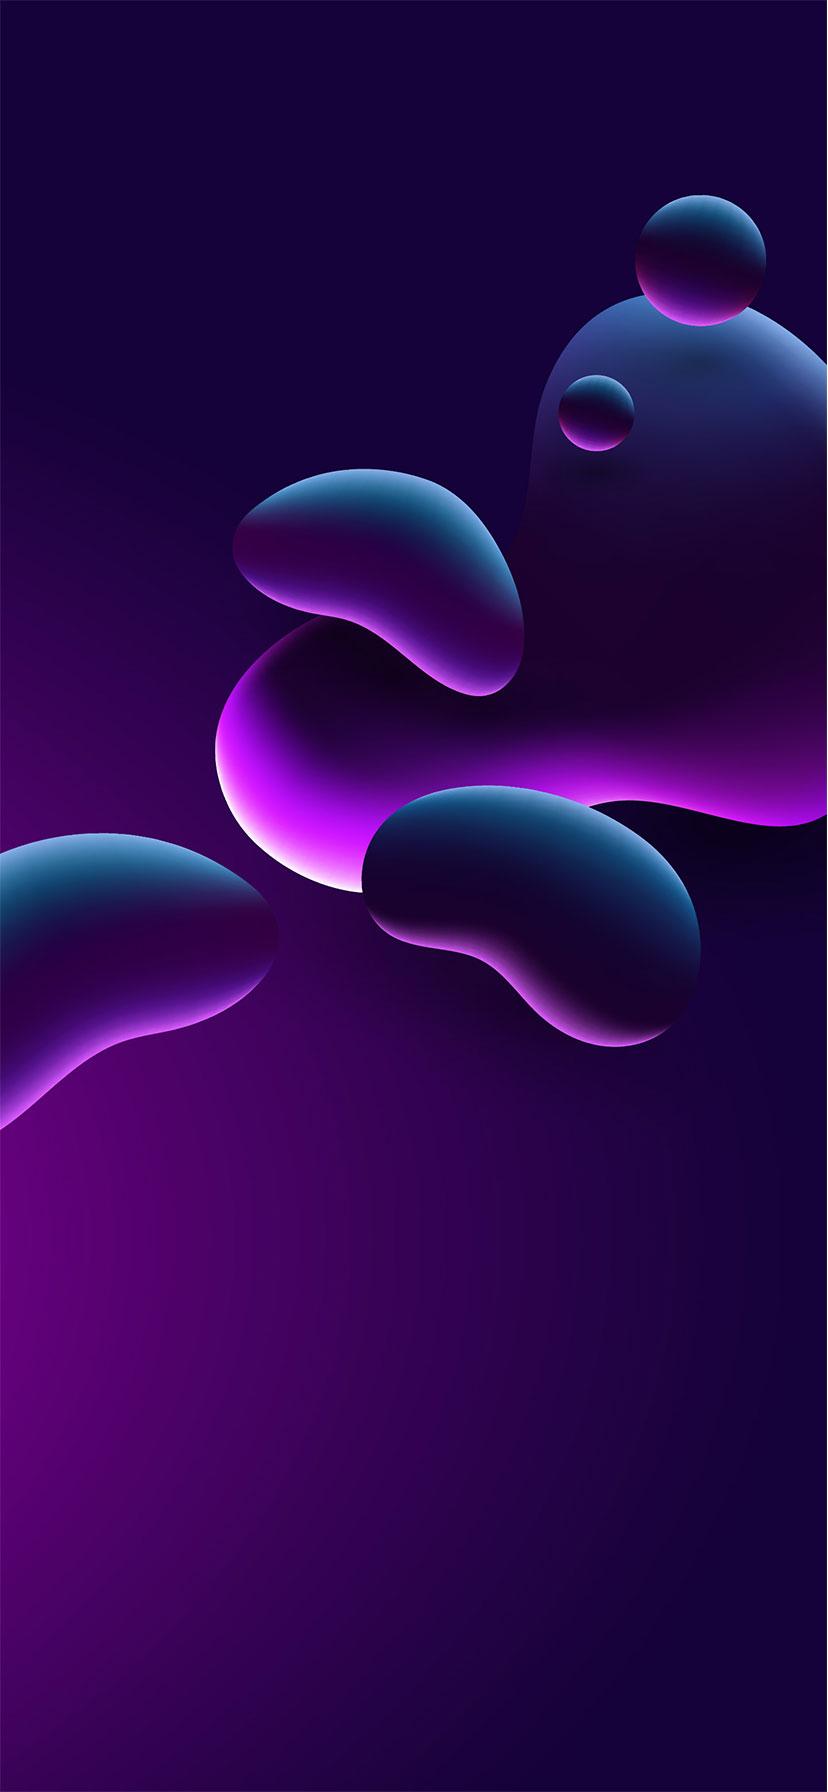 60+ Latest High Quality iPhone 11 Wallpapers & Backgrounds for